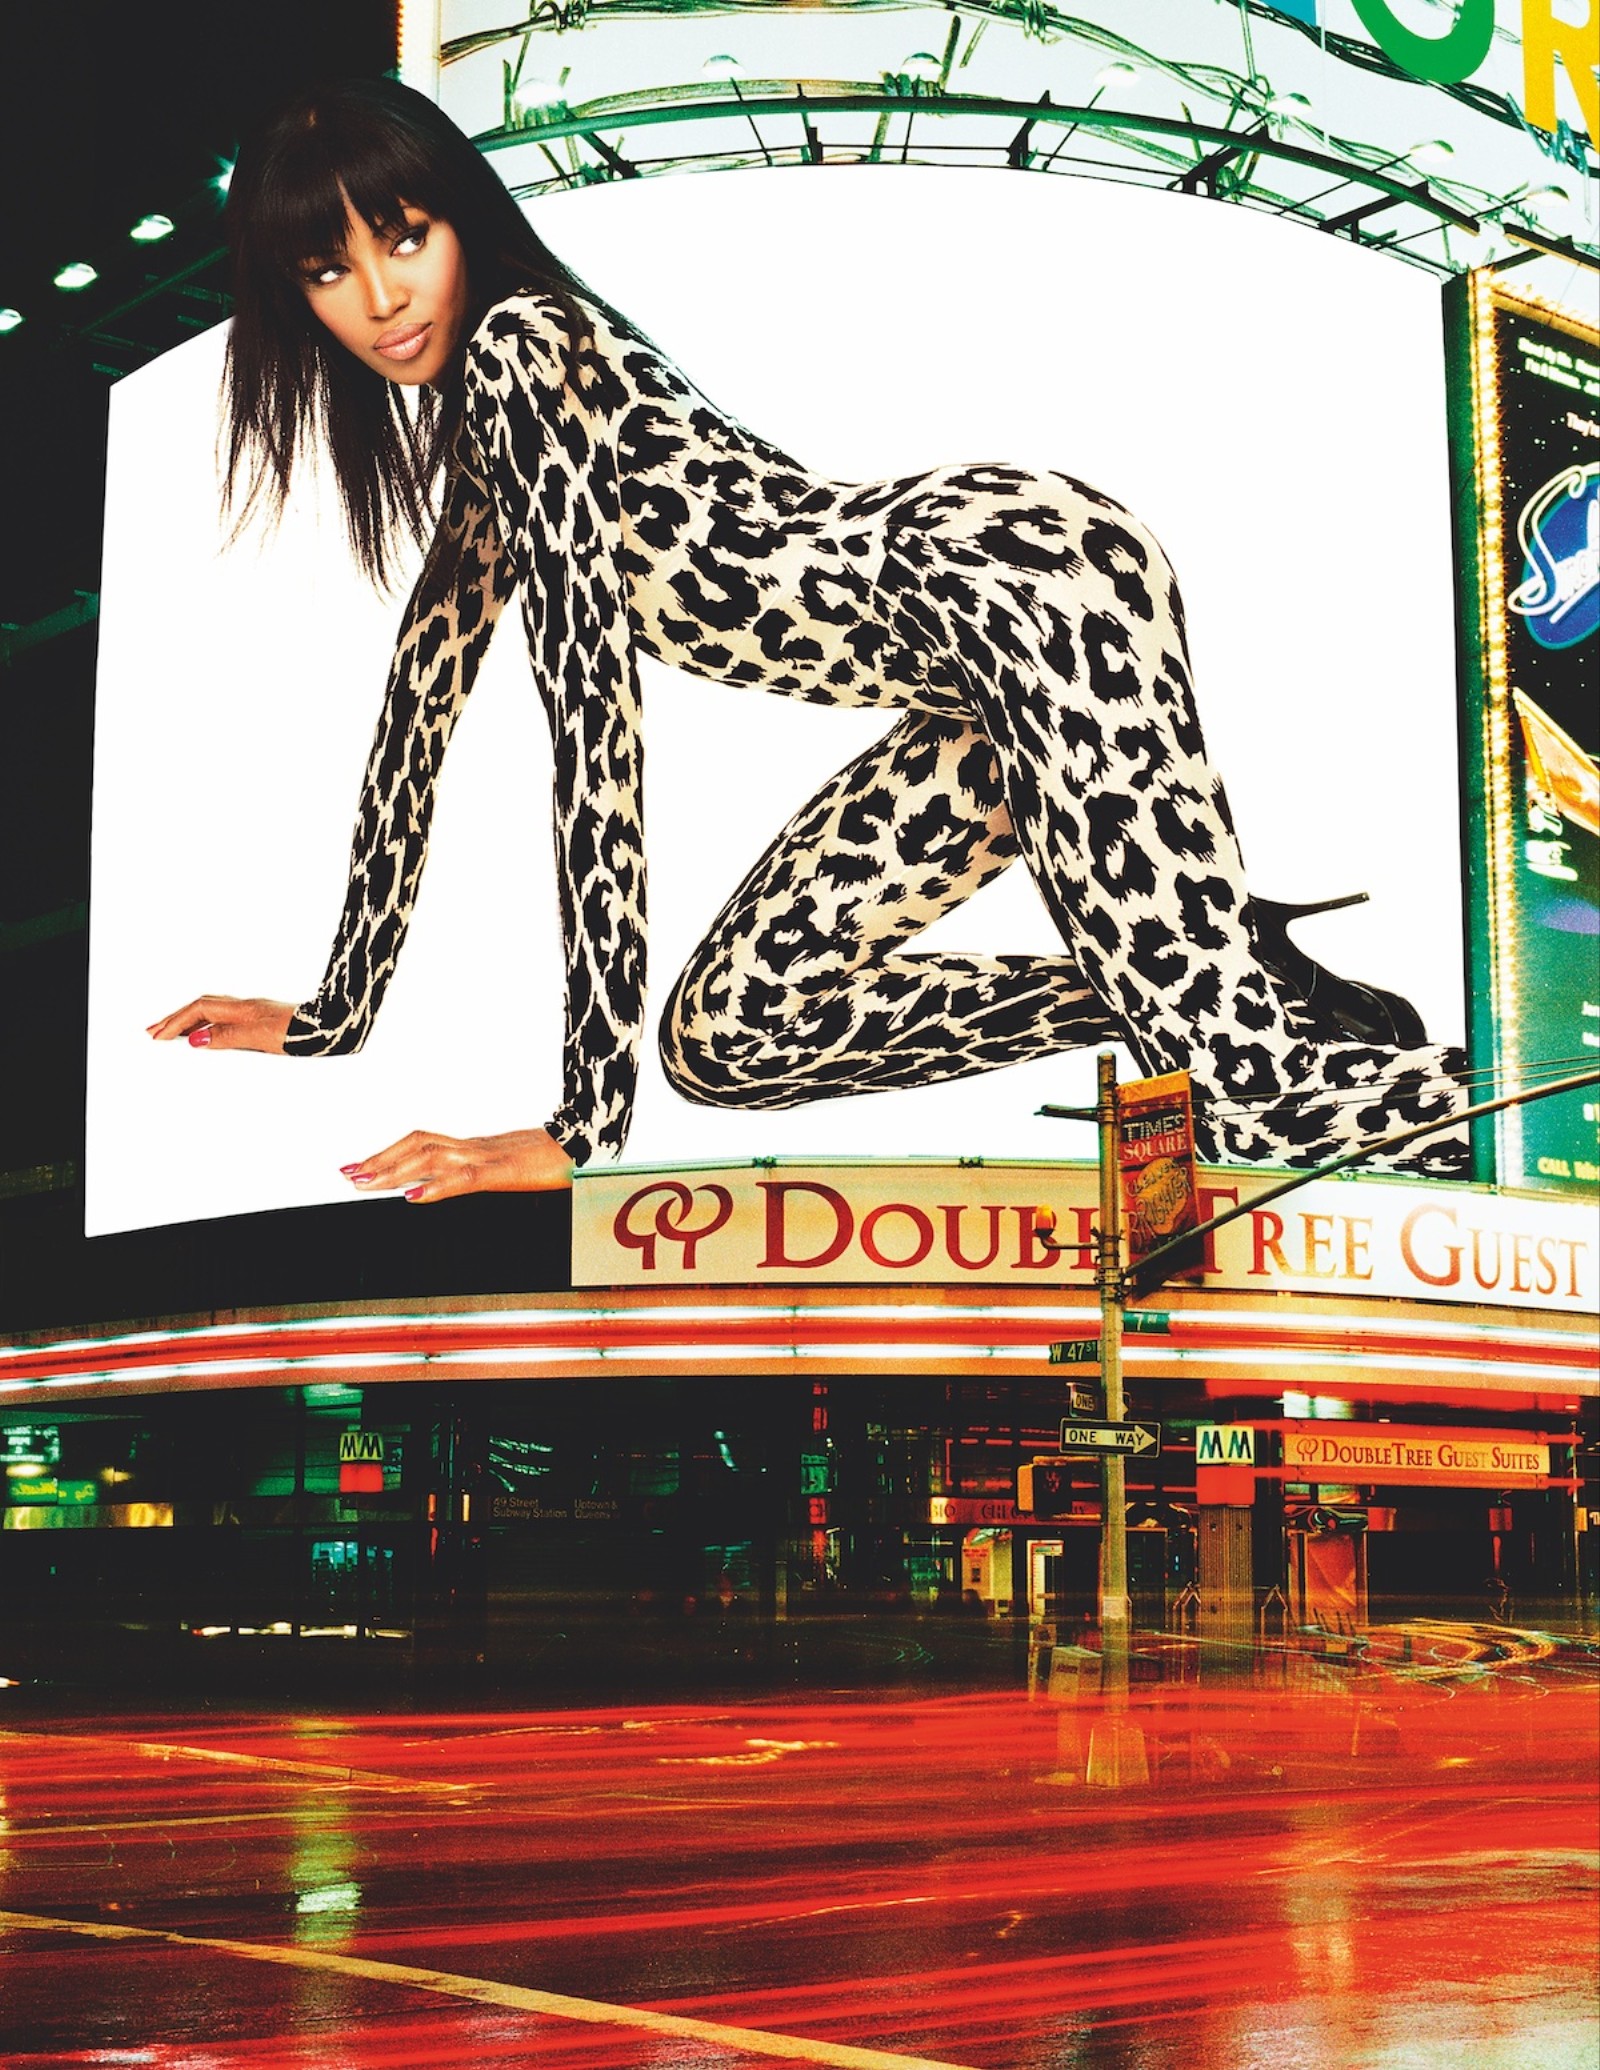 naomi campbell in a leopard print catsuit on a billboard in a brightly lit cityscape